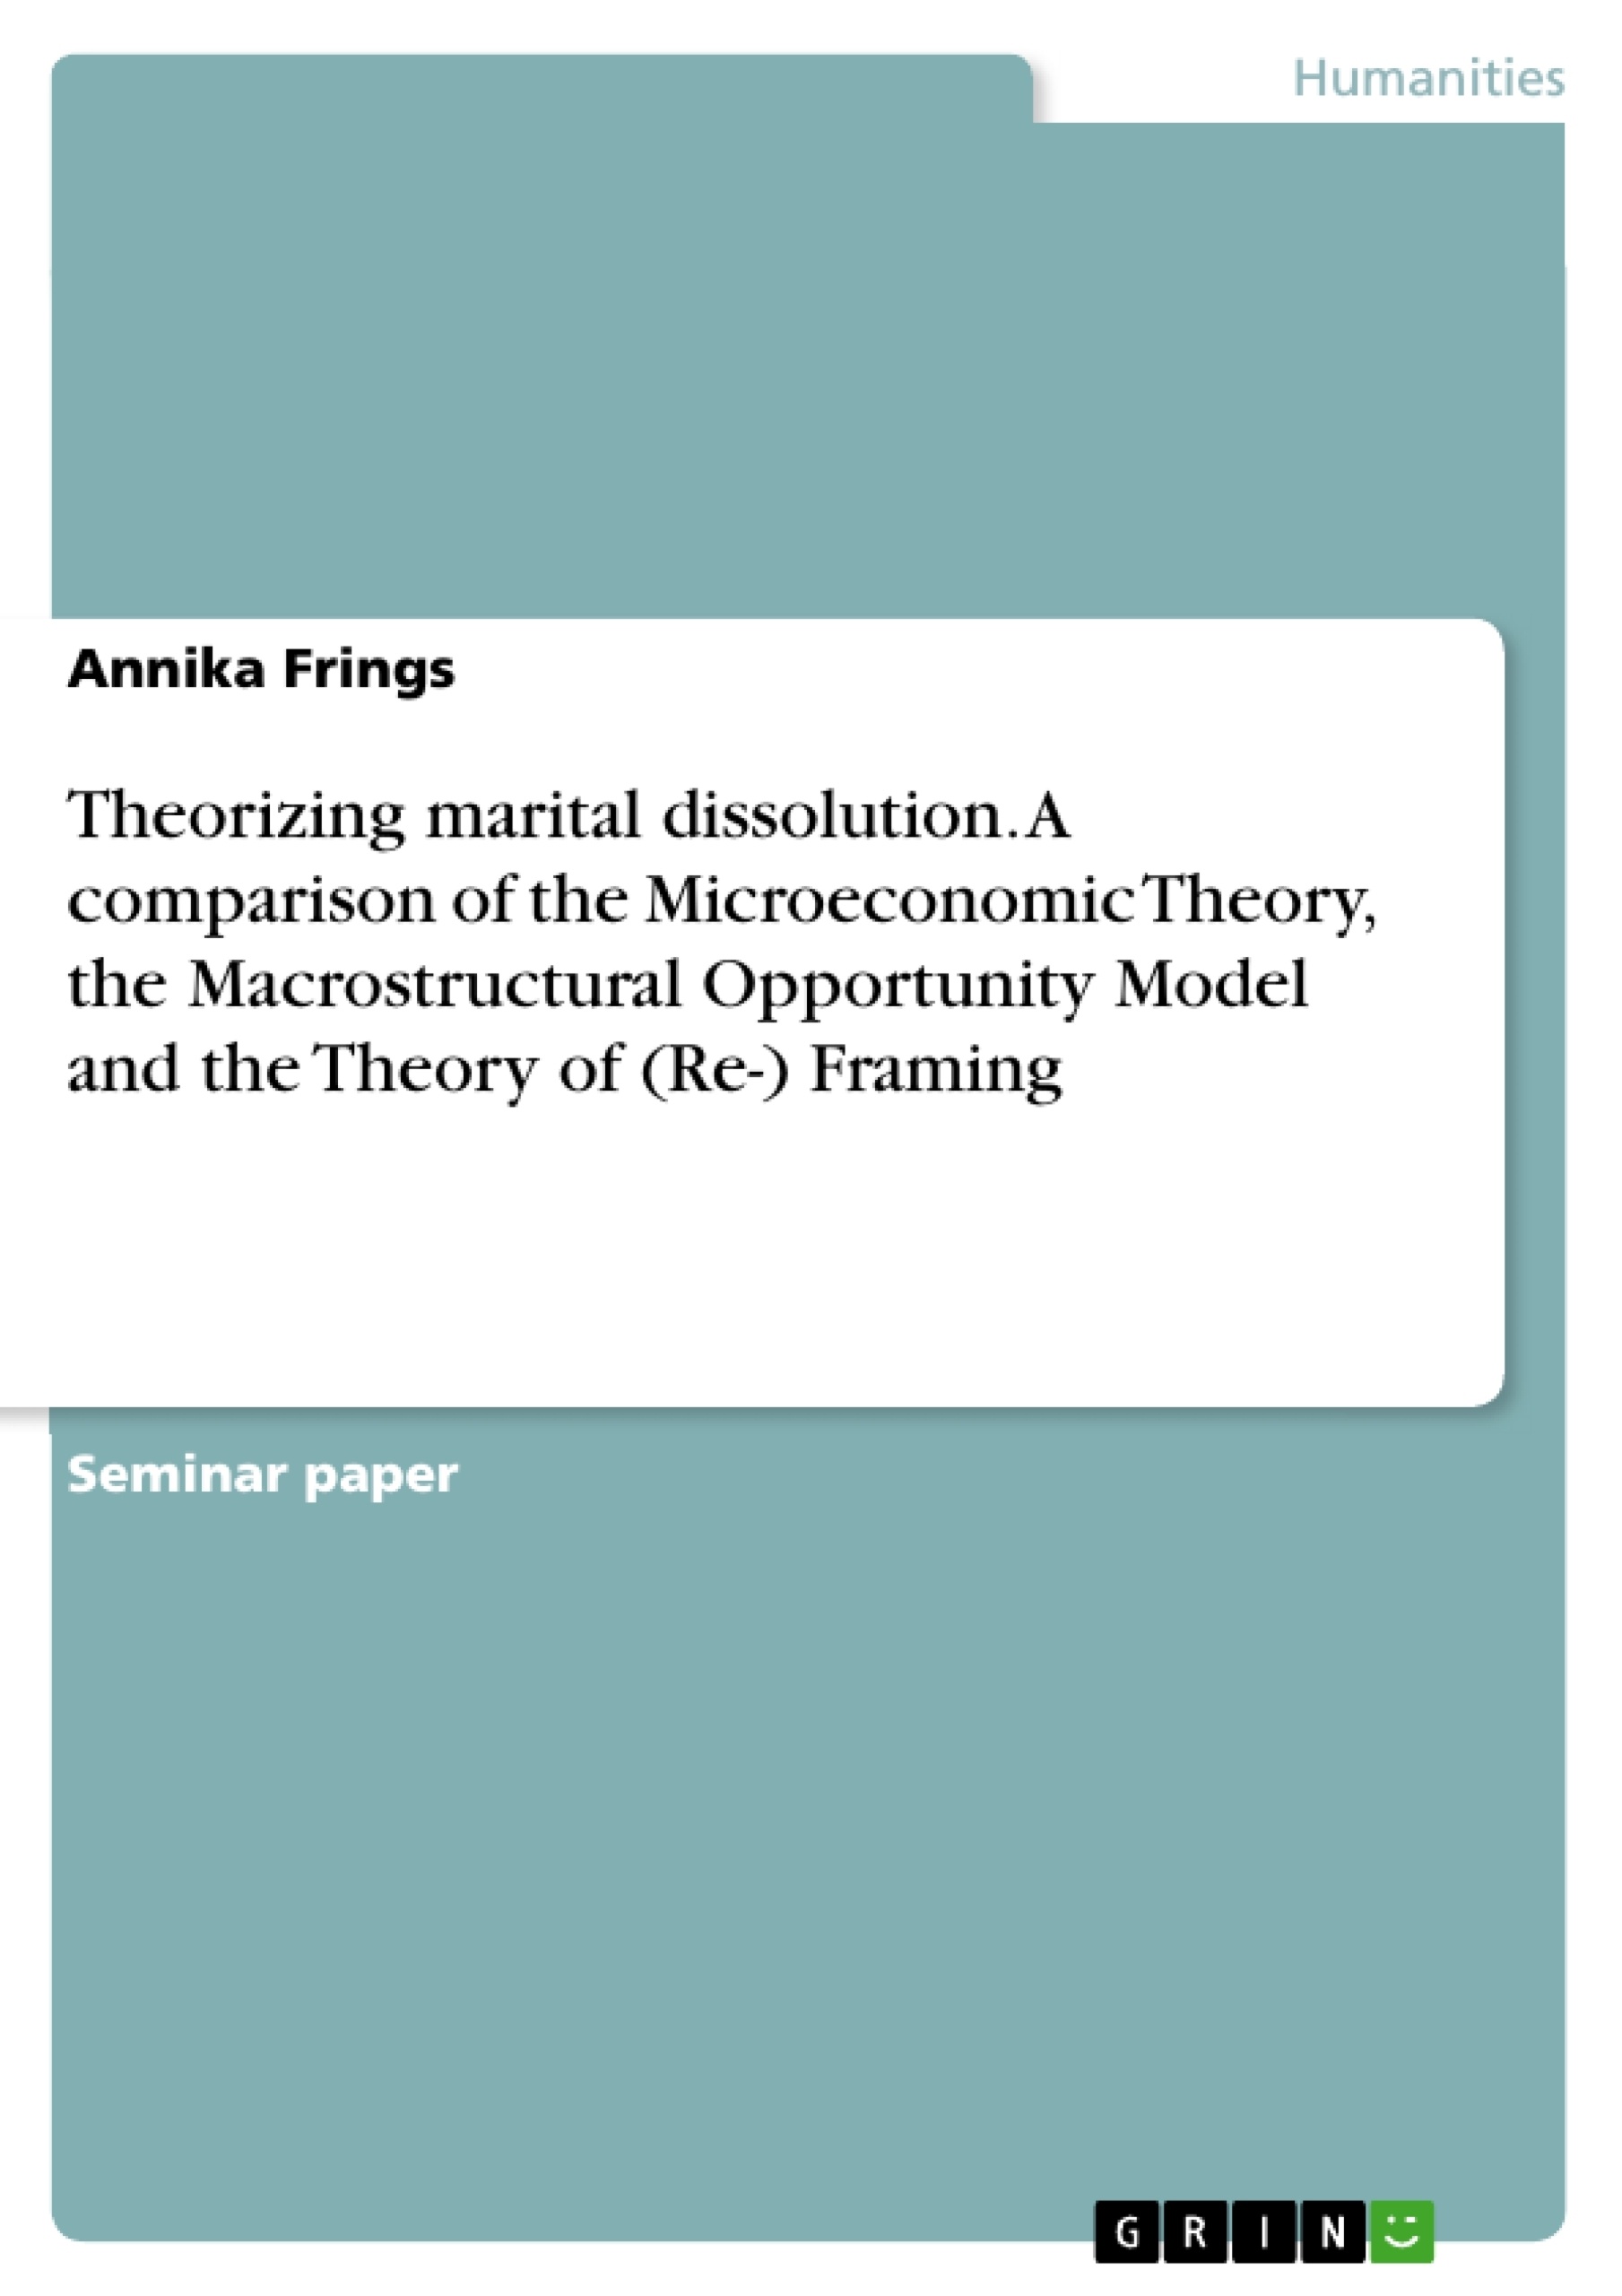 Título: Theorizing marital dissolution. A comparison of the Microeconomic Theory, the Macrostructural Opportunity Model and the Theory of (Re-) Framing